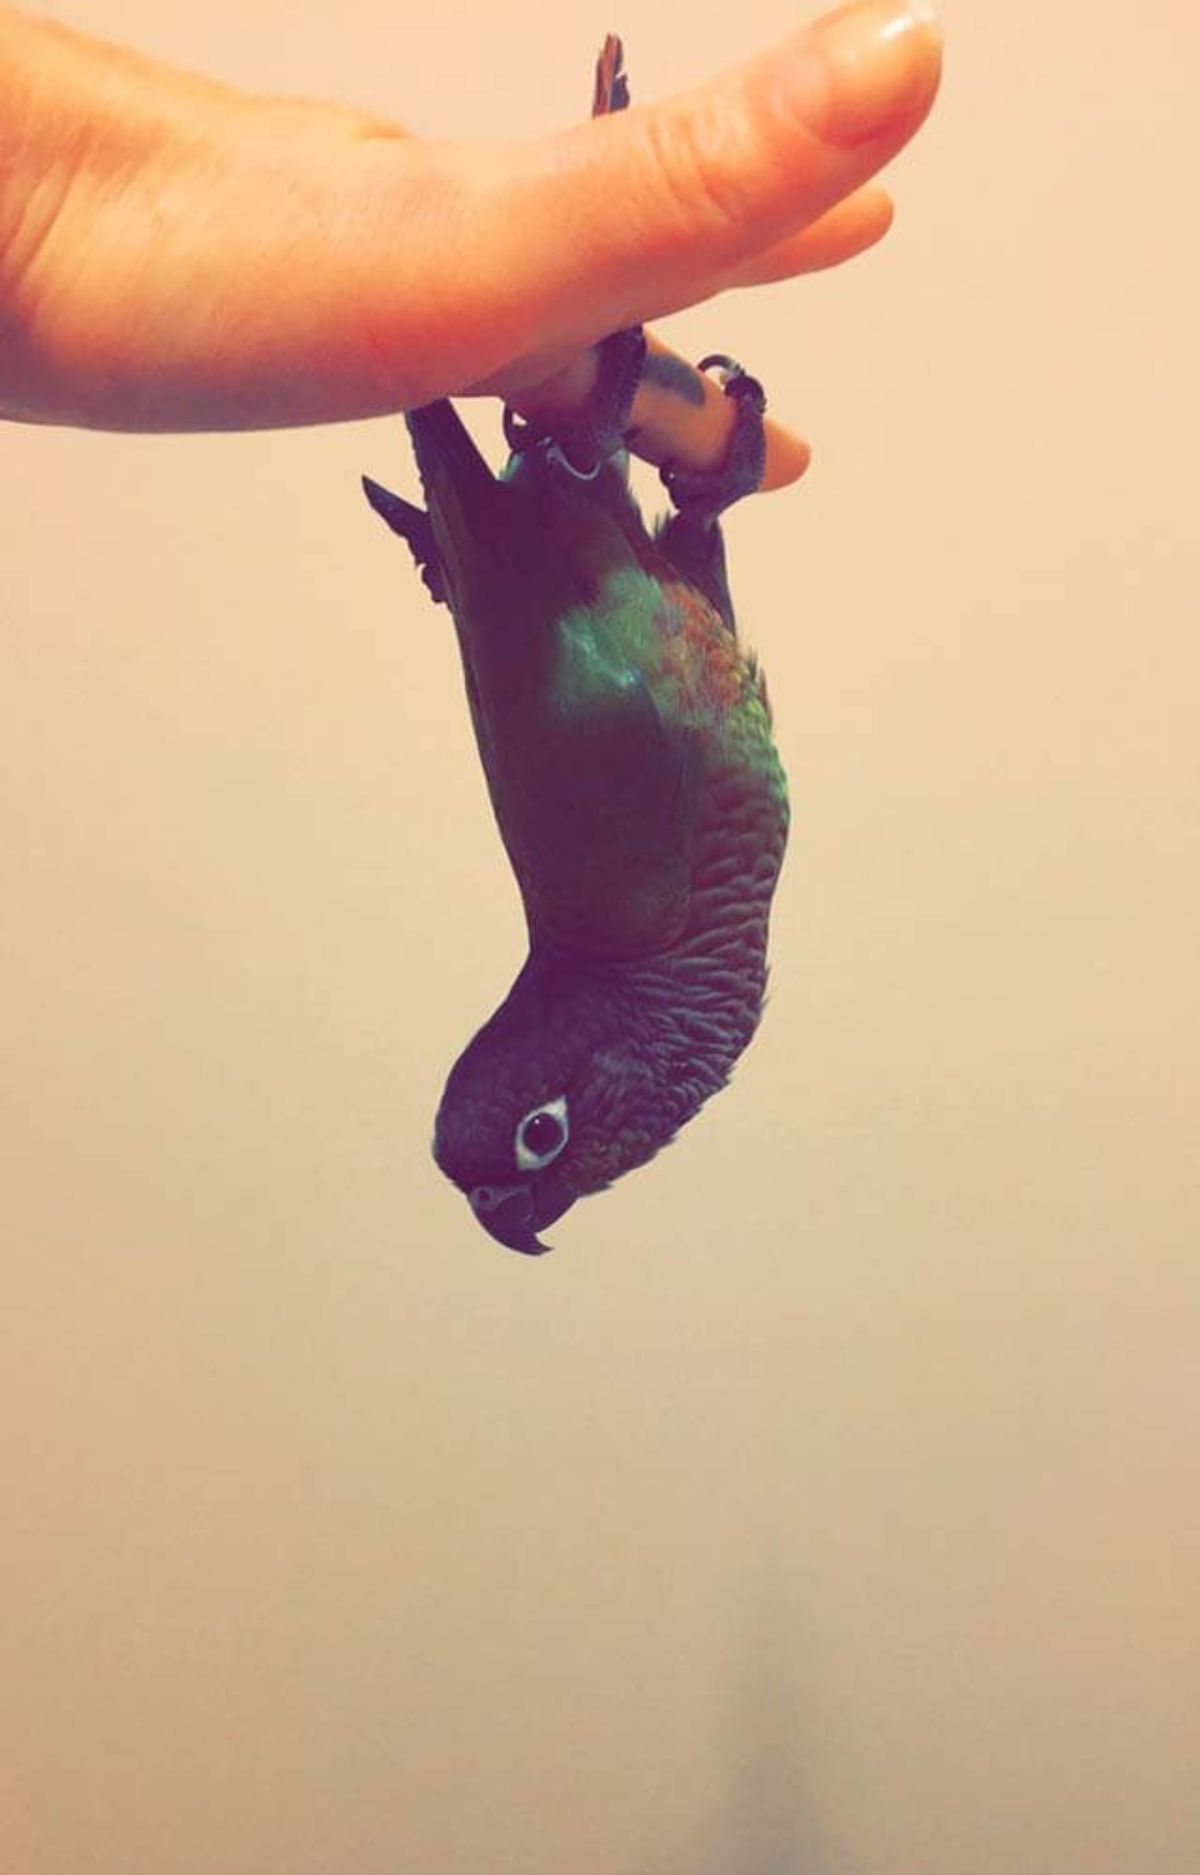 green bird hanging upside down from a person's finger